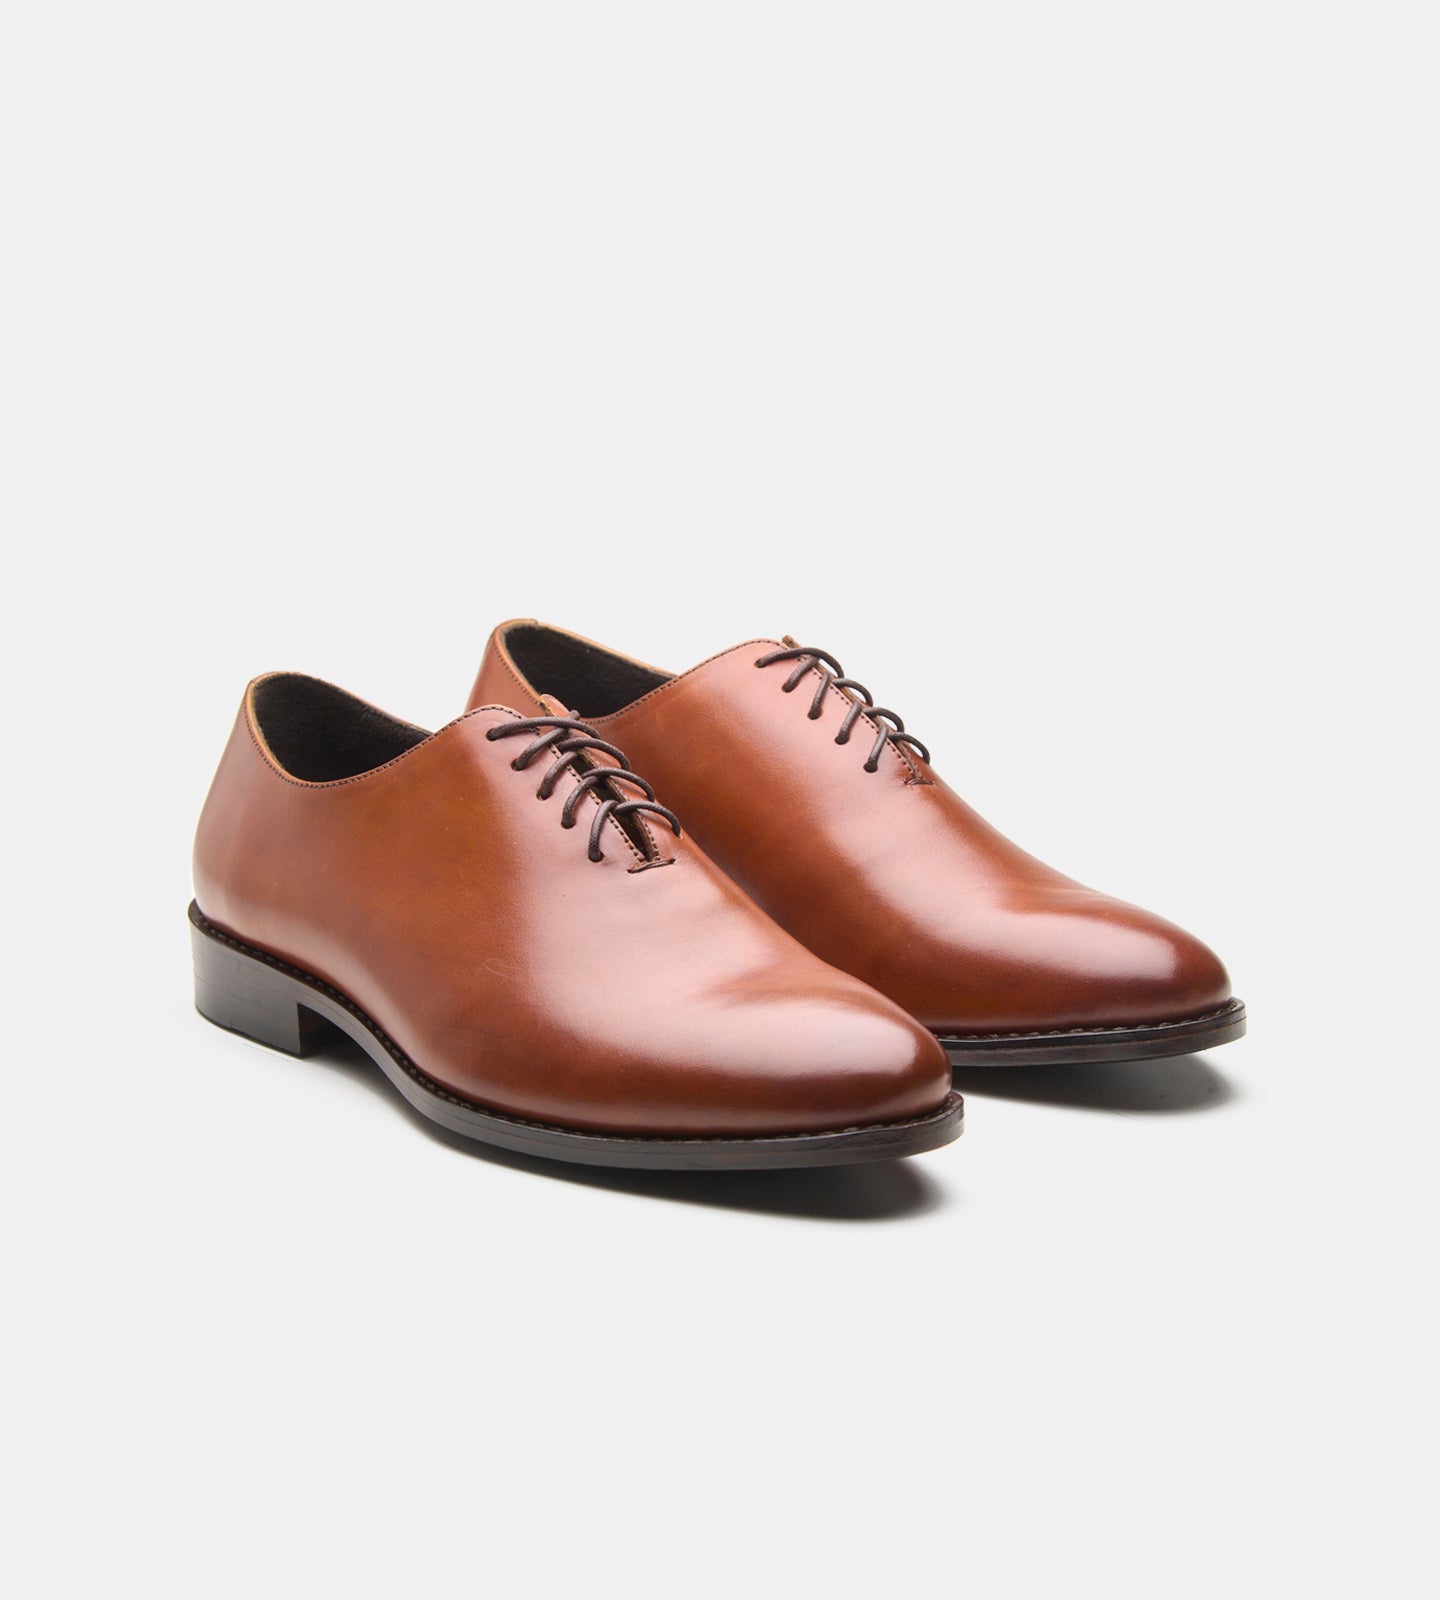 Goodyear Welted Cognac Wholecut Oxfords